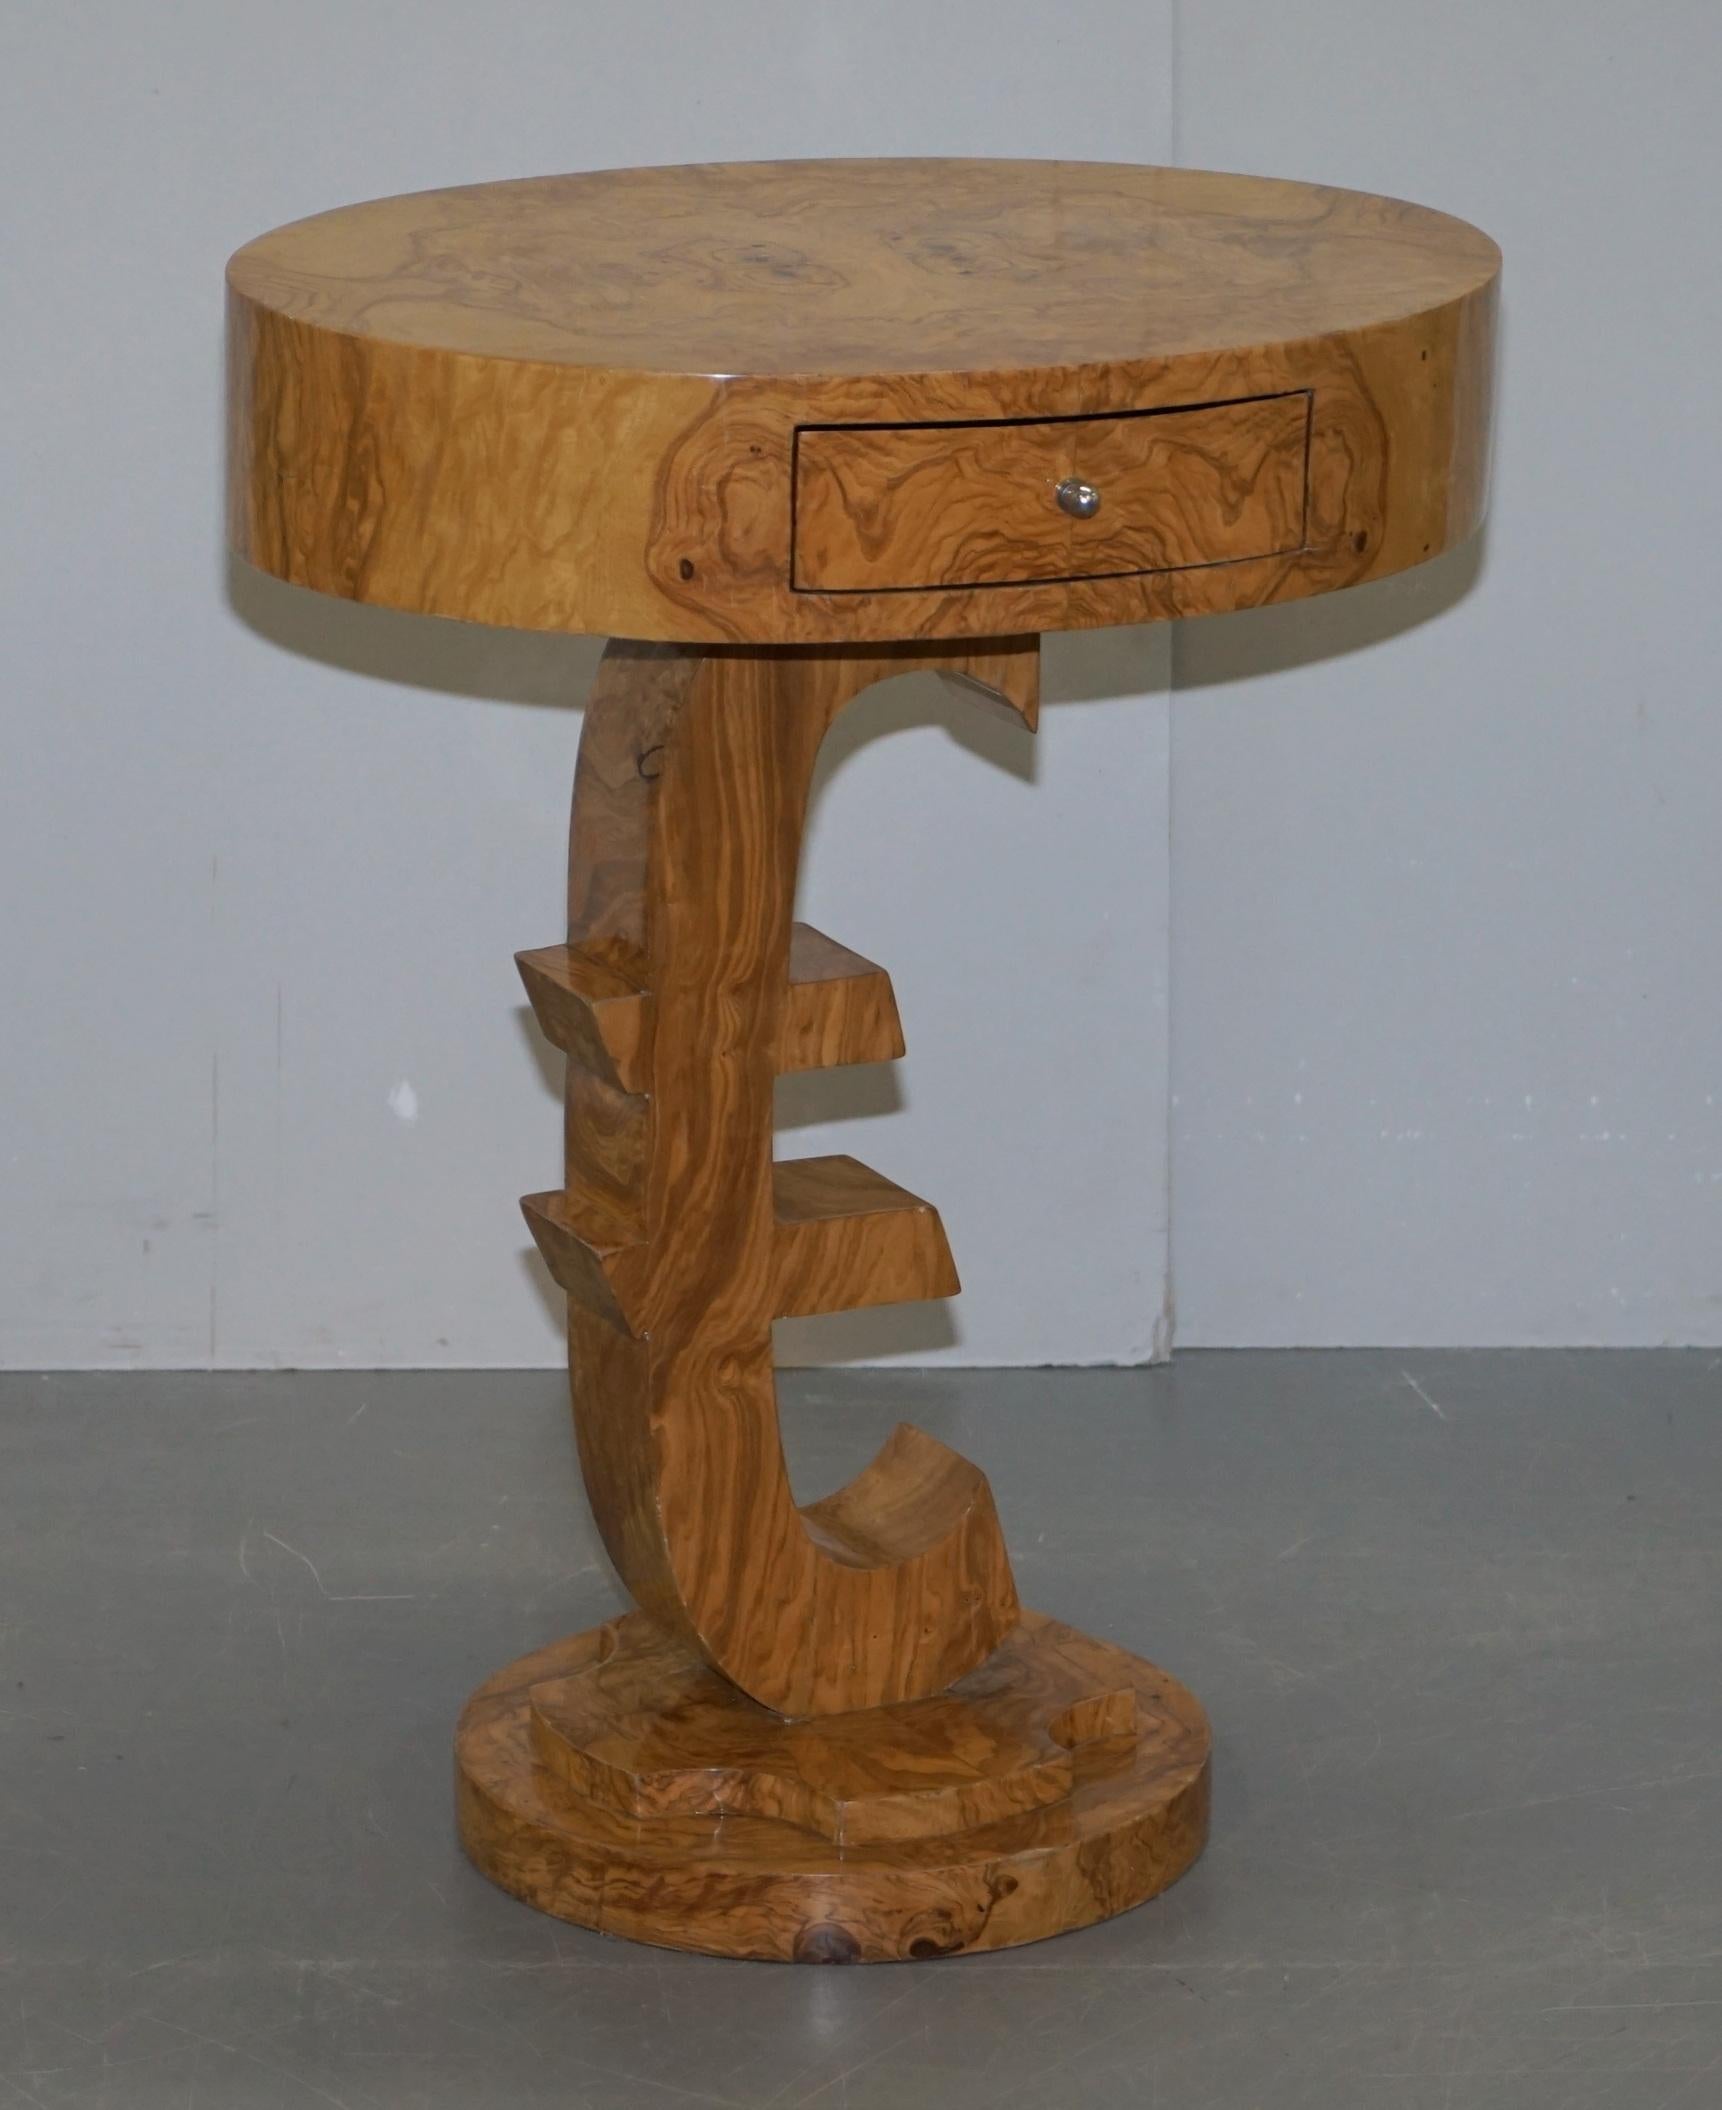 We are delighted to offer for sale this lovely Art deco style burr walnut lamp or side table with a Euro sign base

A very well made piece, it has a single drawer, its after the styles with this type of timber, of the art deco pieces, naturally